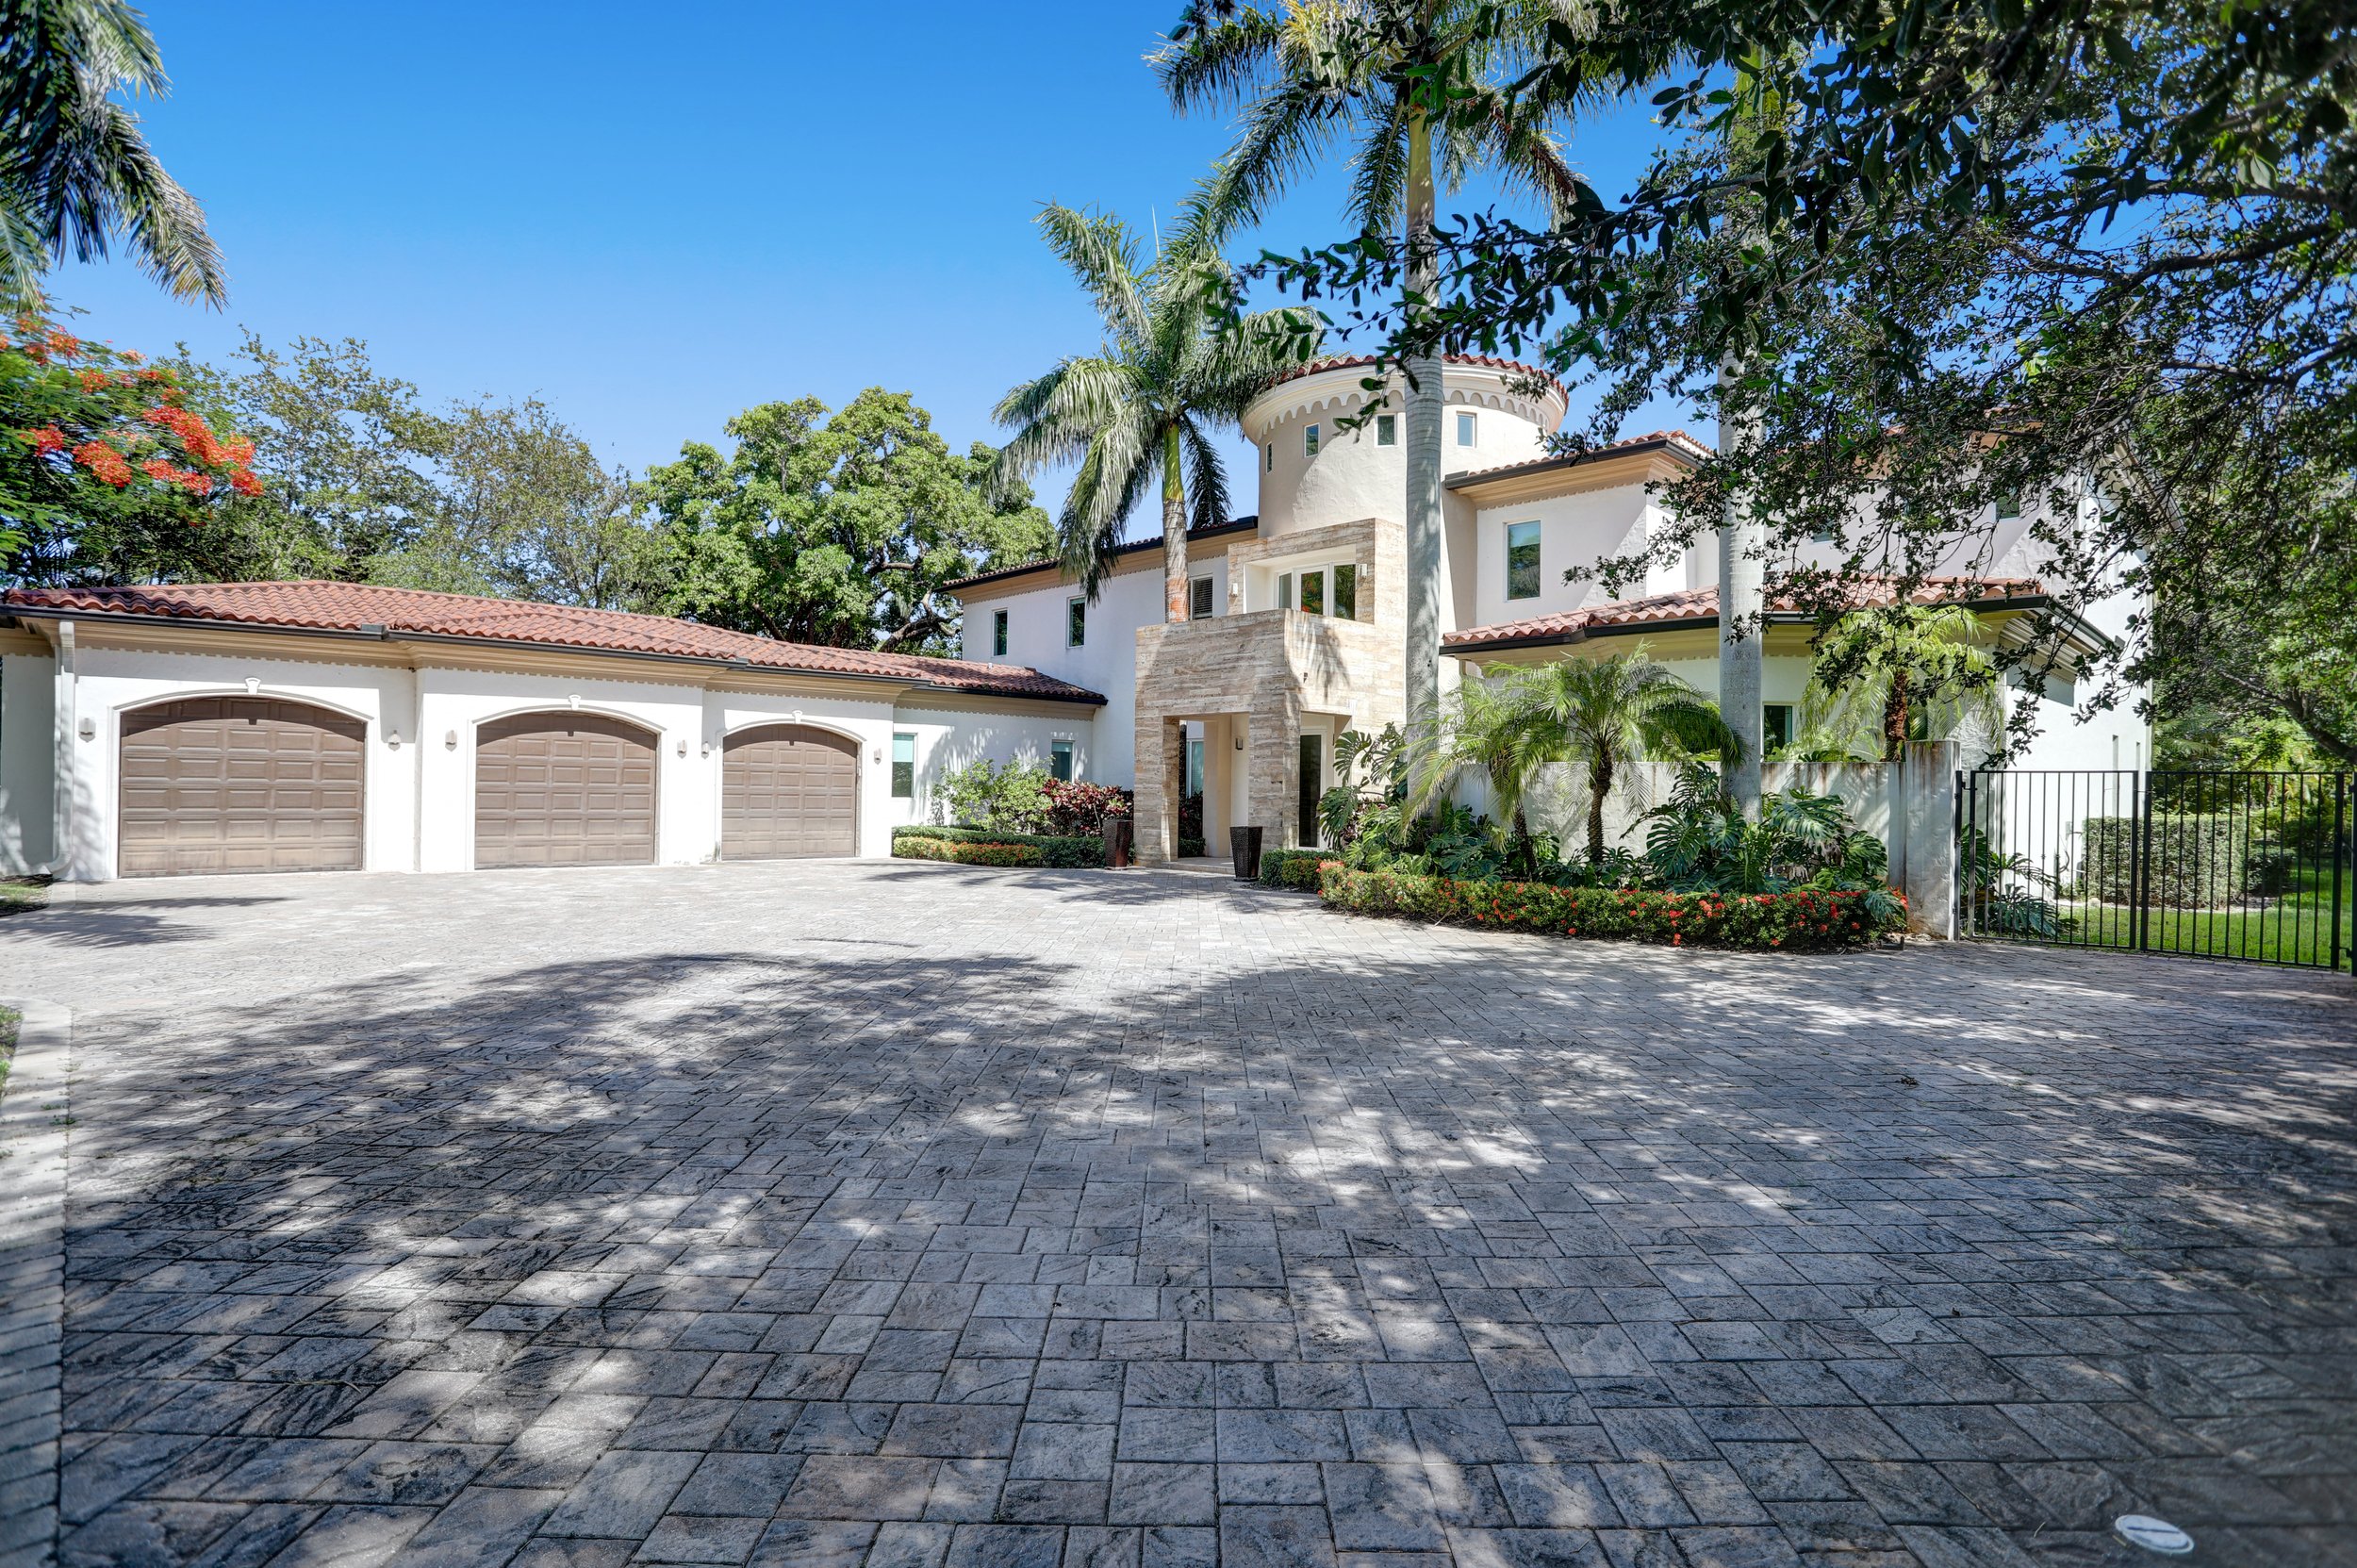 Master Brokers Forum Listing: Check Out A Pinecrest Mediterranean Mansion Asking $5.9 Million1.jpg